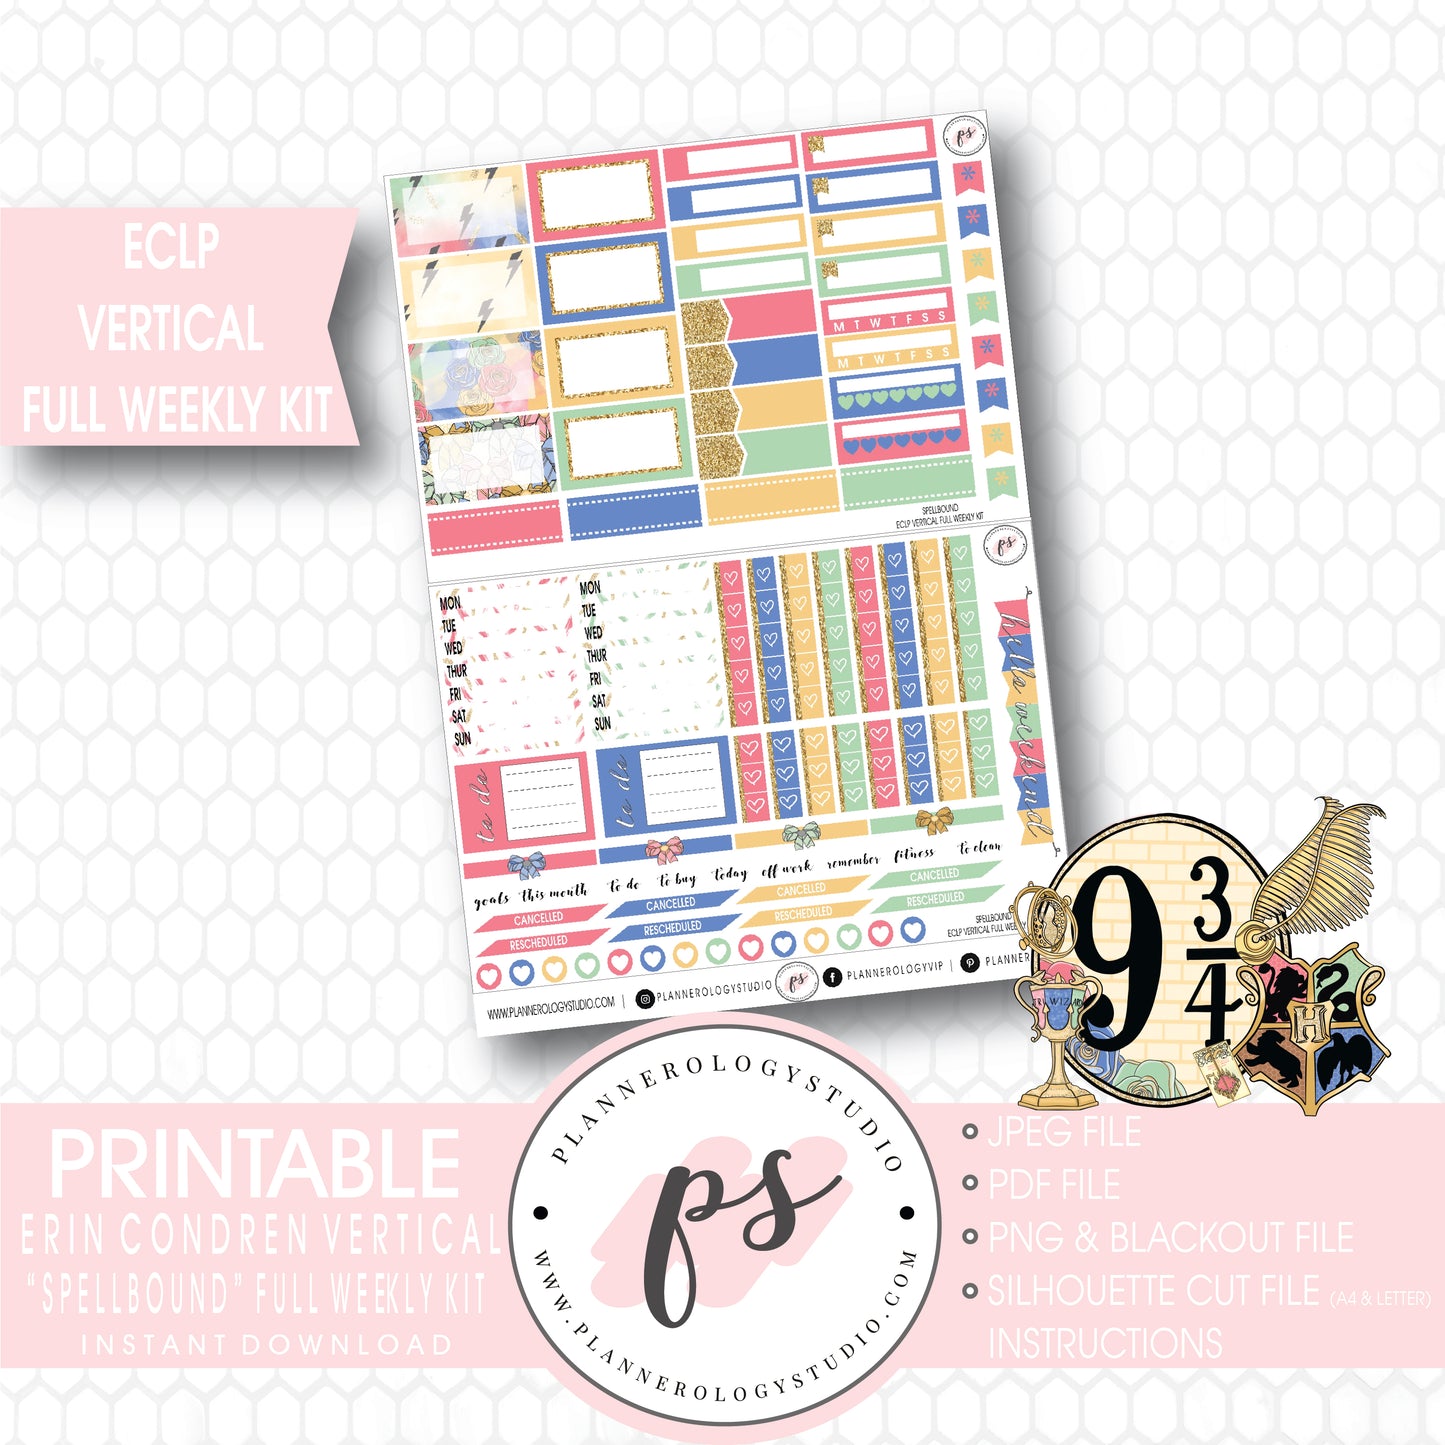 Spellbound (Harry Potter) Full Weekly Kit Printable Planner Stickers (for use with ECLP Vertical) - Plannerologystudio